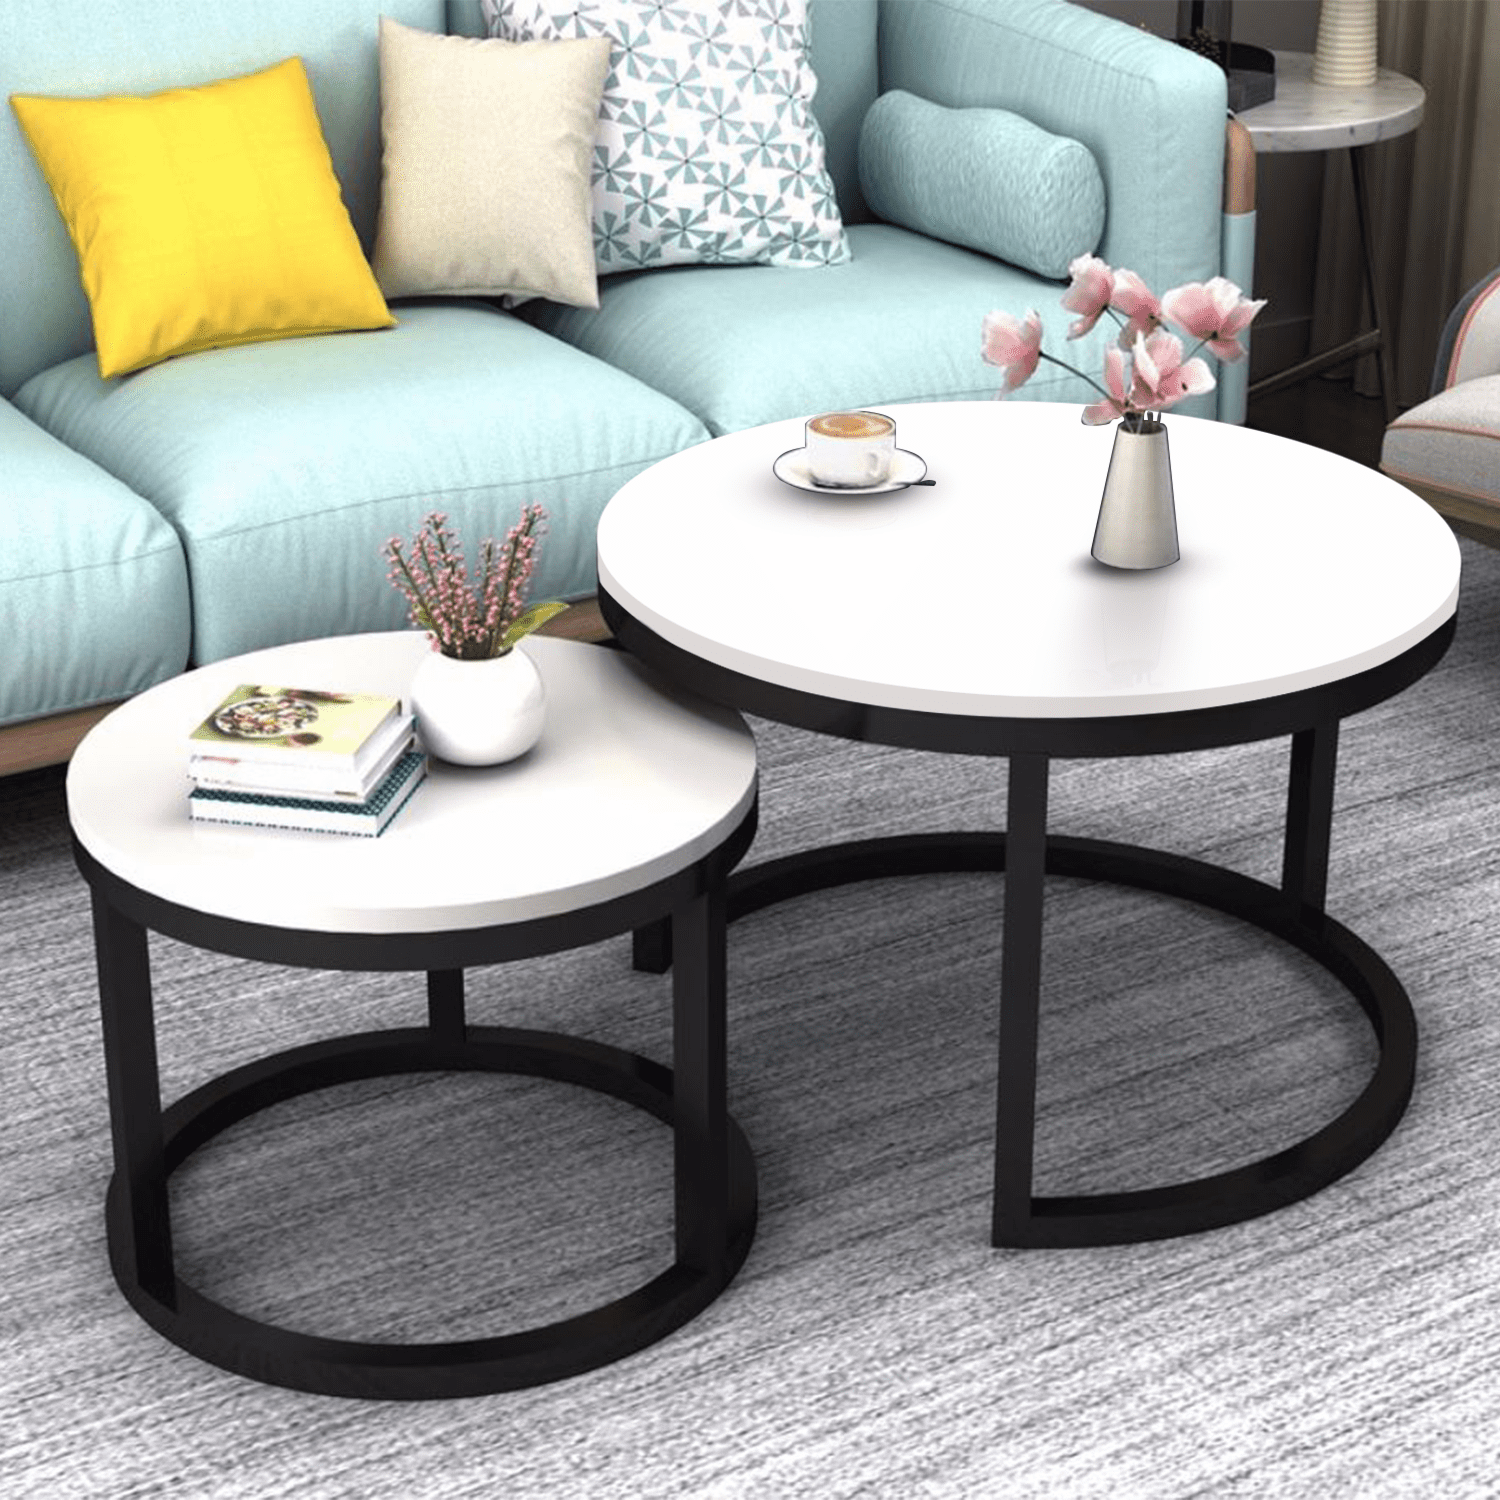 2 Round Tea Table Coffee Table Desk Sets | White - Twin Sets Multi